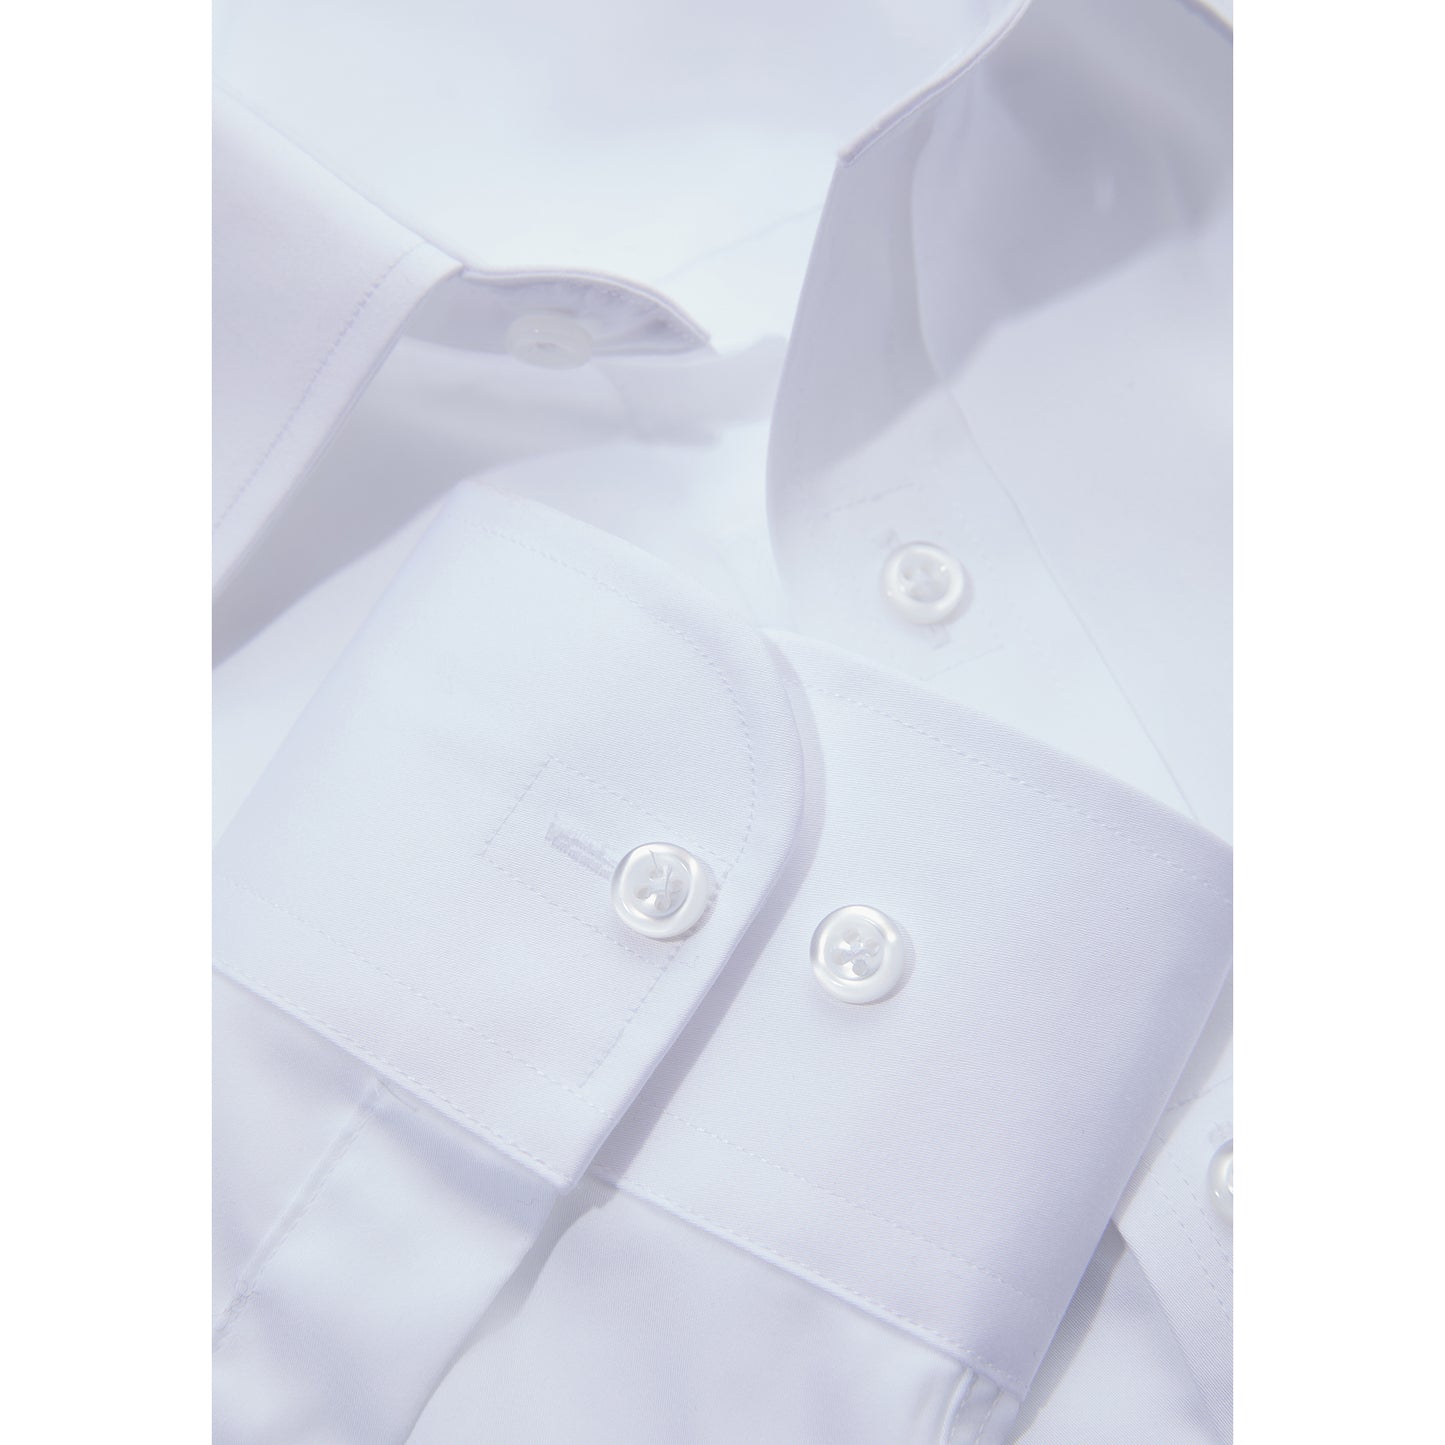 Close-up of white shirt neck line and cuff